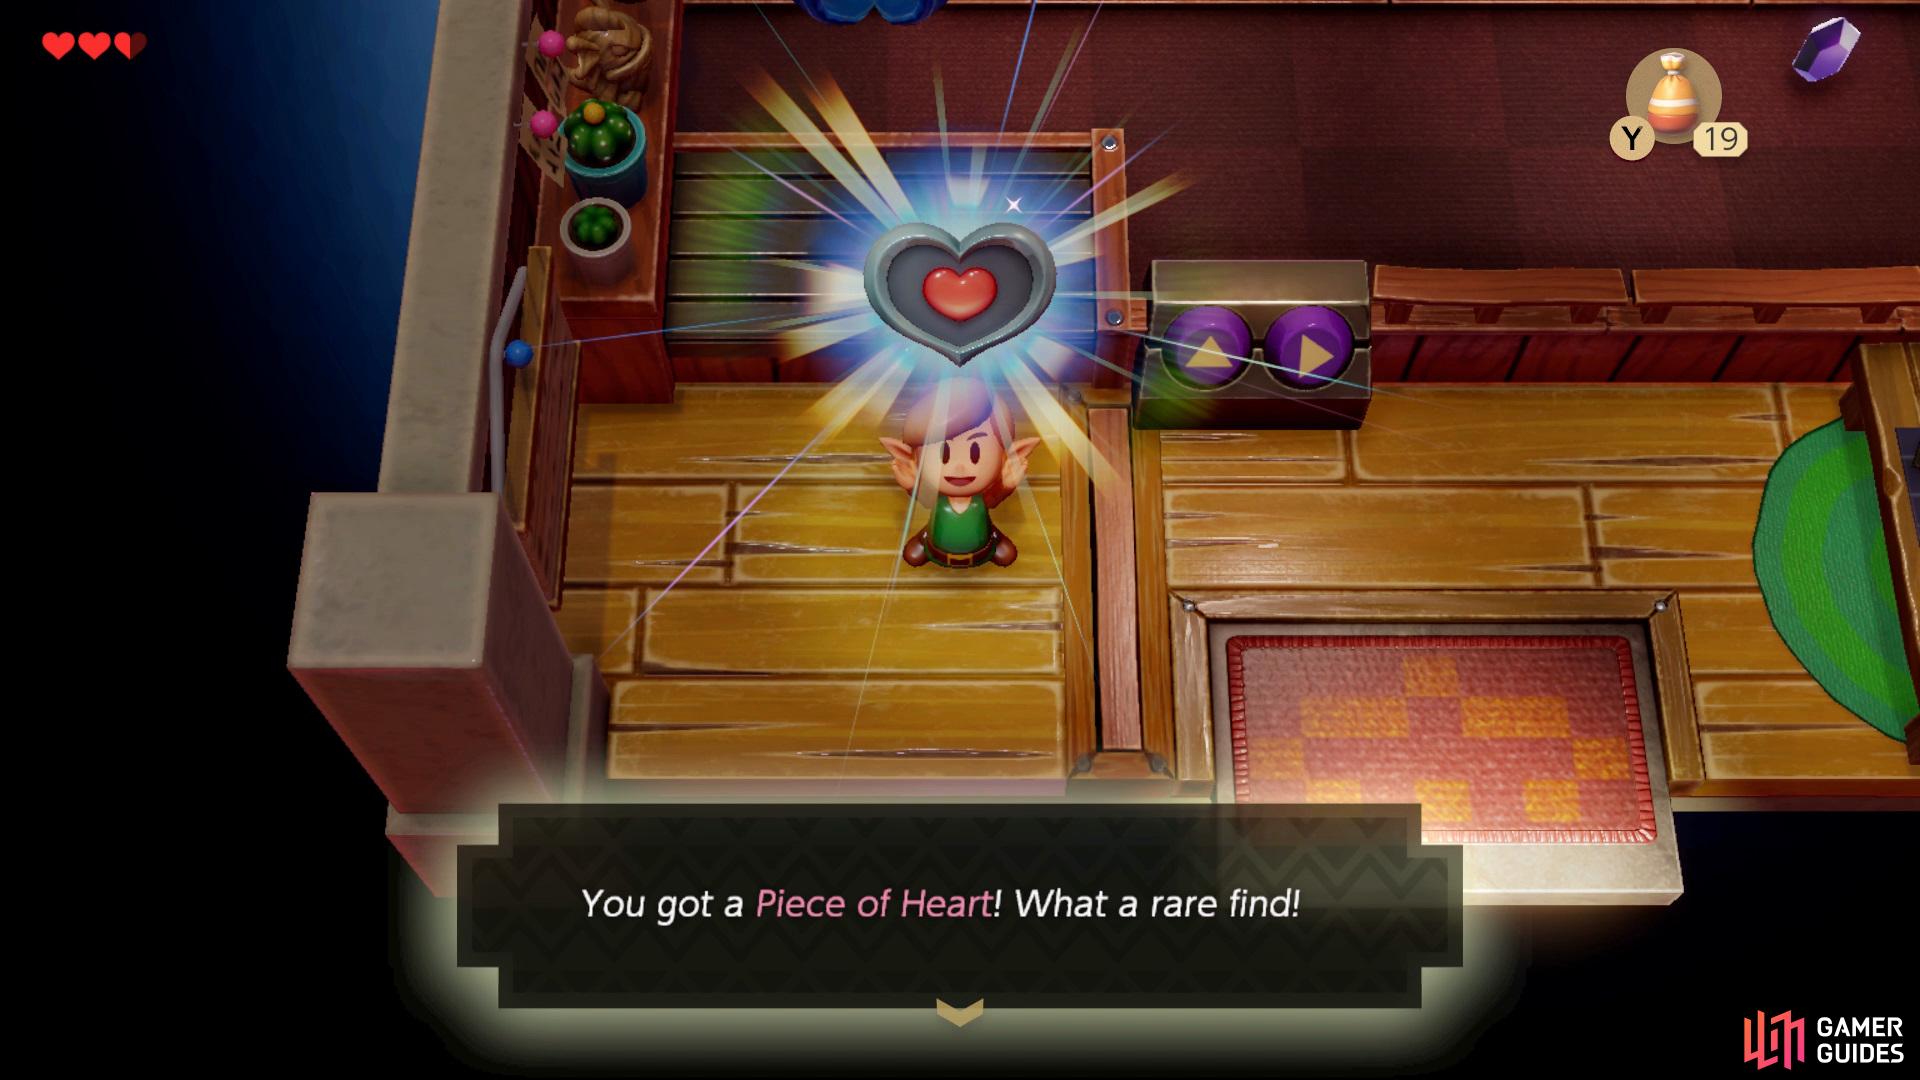 Go into the Trendy Game shop and win yourself a Piece of Heart, then after youve won some more items youll be able to win a Piec of Heart.